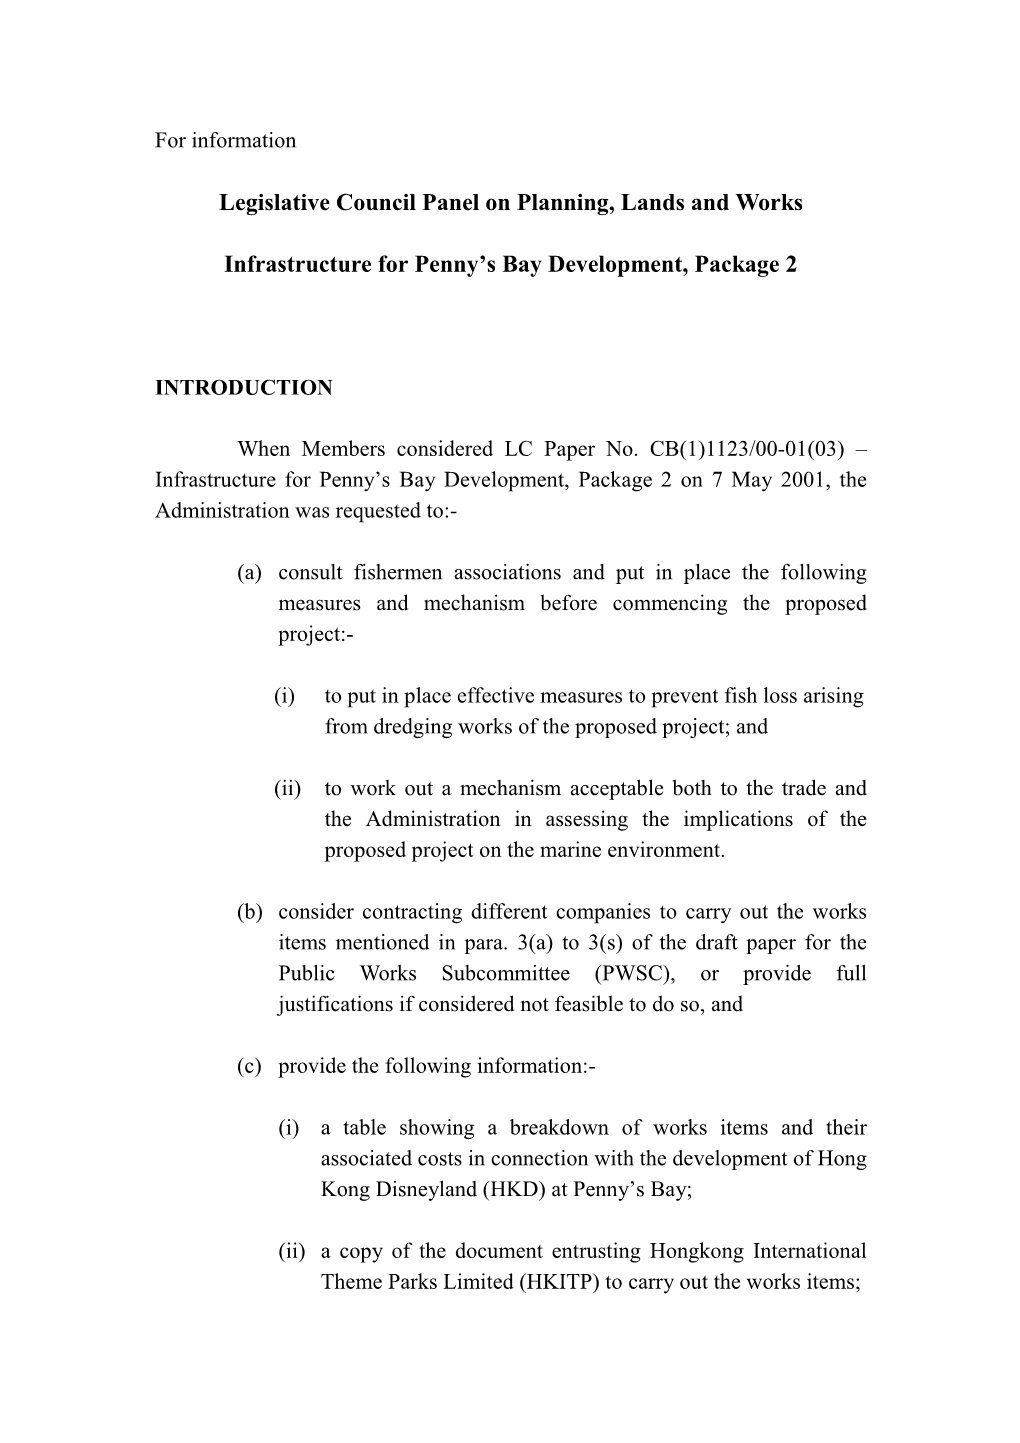 Information Paper on Infrastructure for Penny's Bay Development, Package 2